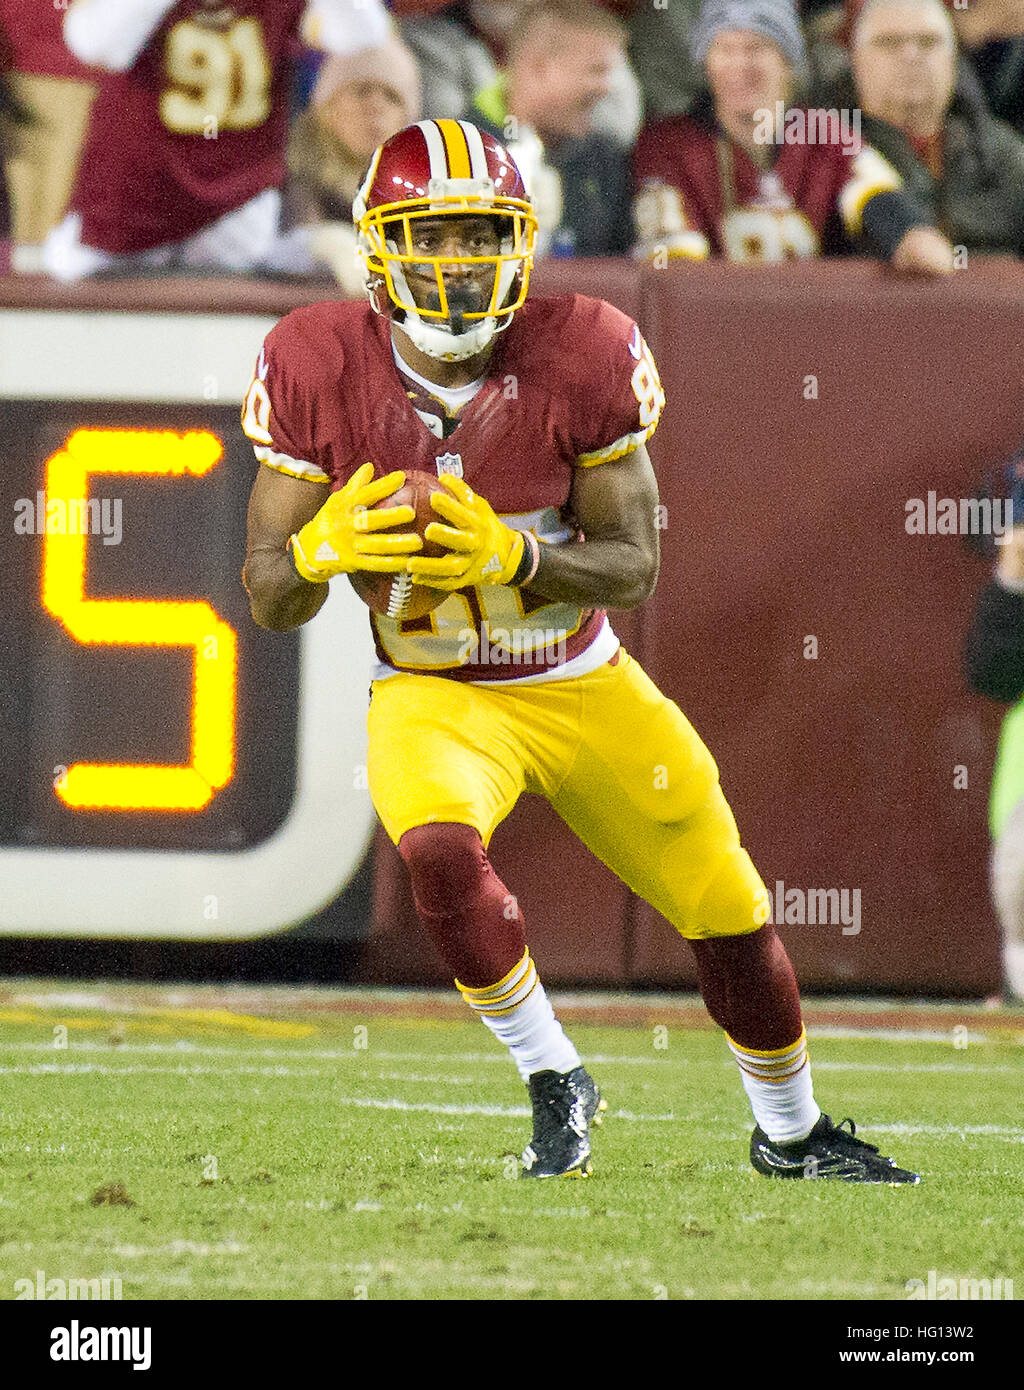 Washington Redskins wide receiver Jamison Crowder (80) returns a punt late in the second quarter against the New York Giants at FedEx Field in Landover, Maryland on Sunday, January 1, 2017. The Giants won the game 19 - 10. Credit: Ron Sachs/CNP (RESTRICTION: NO New York or New Jersey Newspapers or newspapers within a 75 mile radius of New York City) - NO WIRE SERVICE- Foto: Ron Sachs/Consolidated News Photos/Ron Sachs - CNP Stock Photo